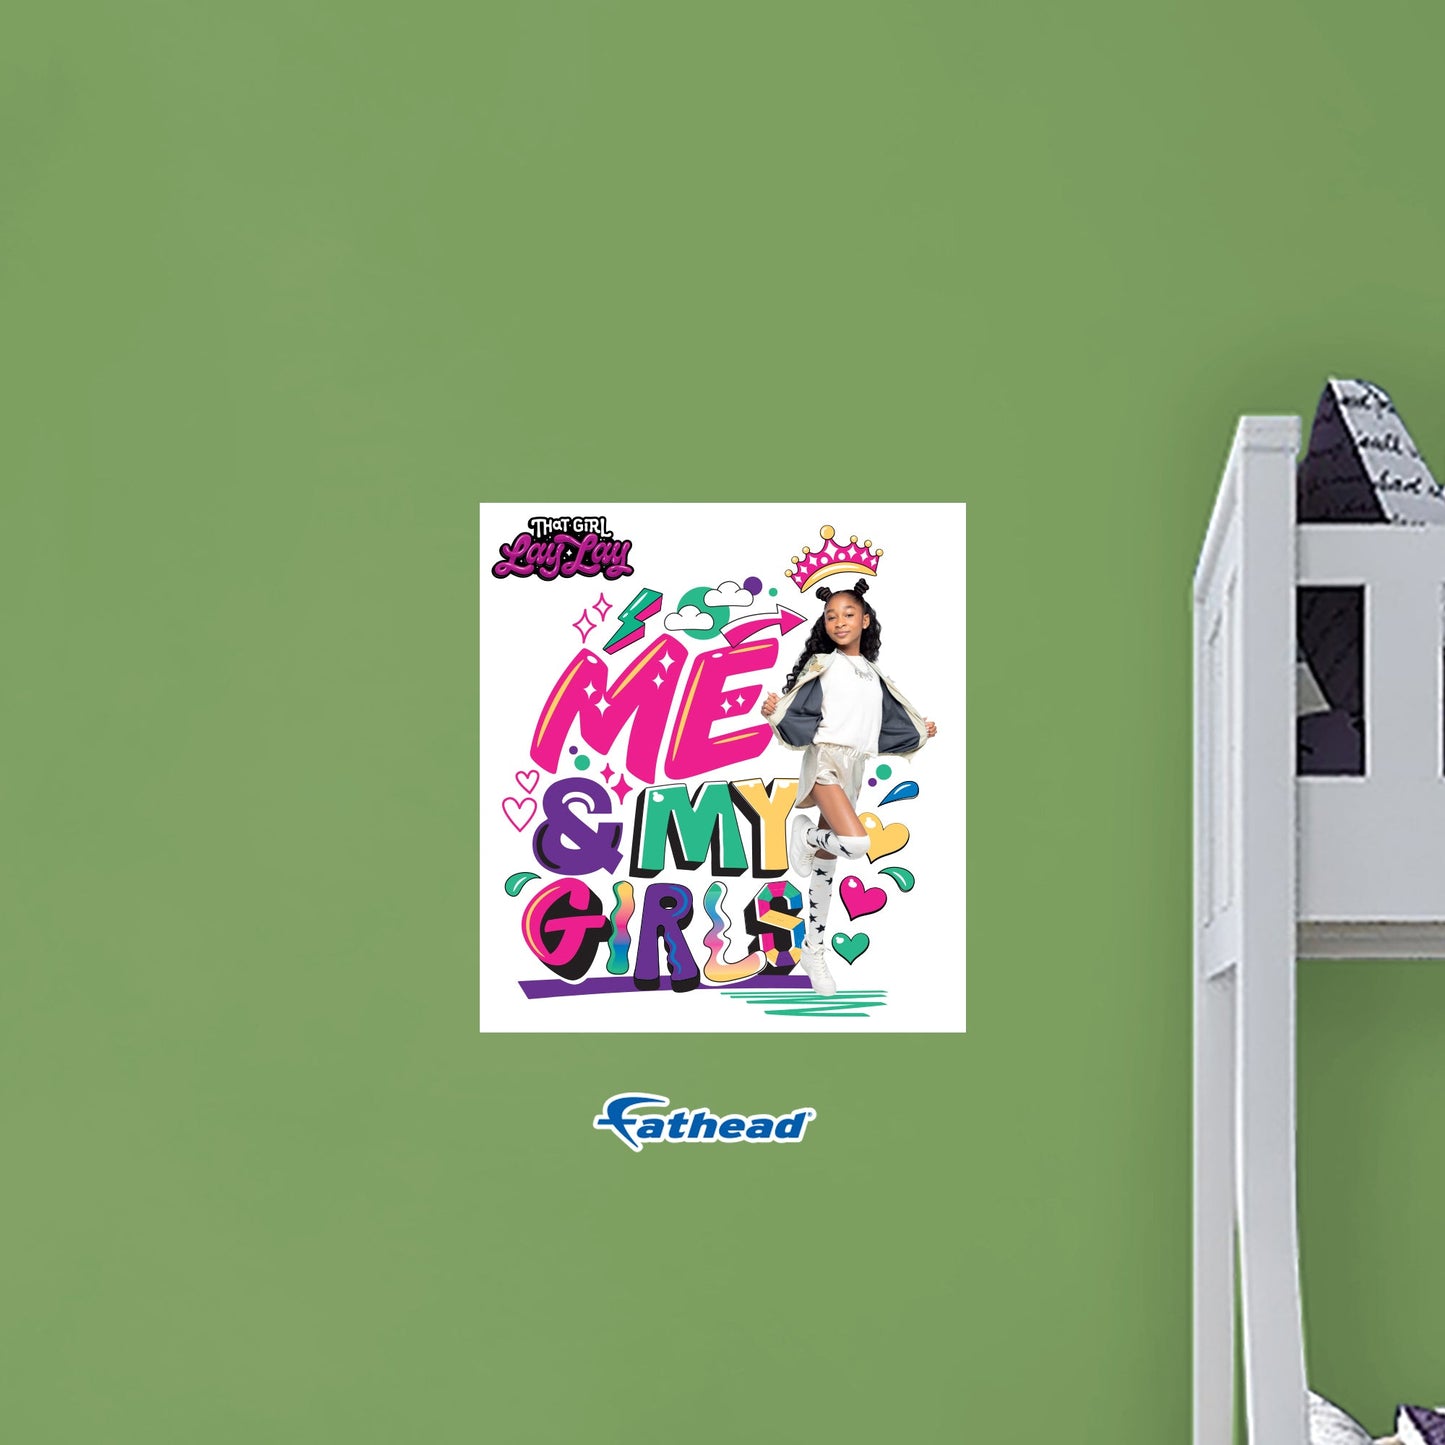 That Girl Lay Lay: Me & My Girls Poster - Officially Licensed Nickelodeon Removable Adhesive Decal